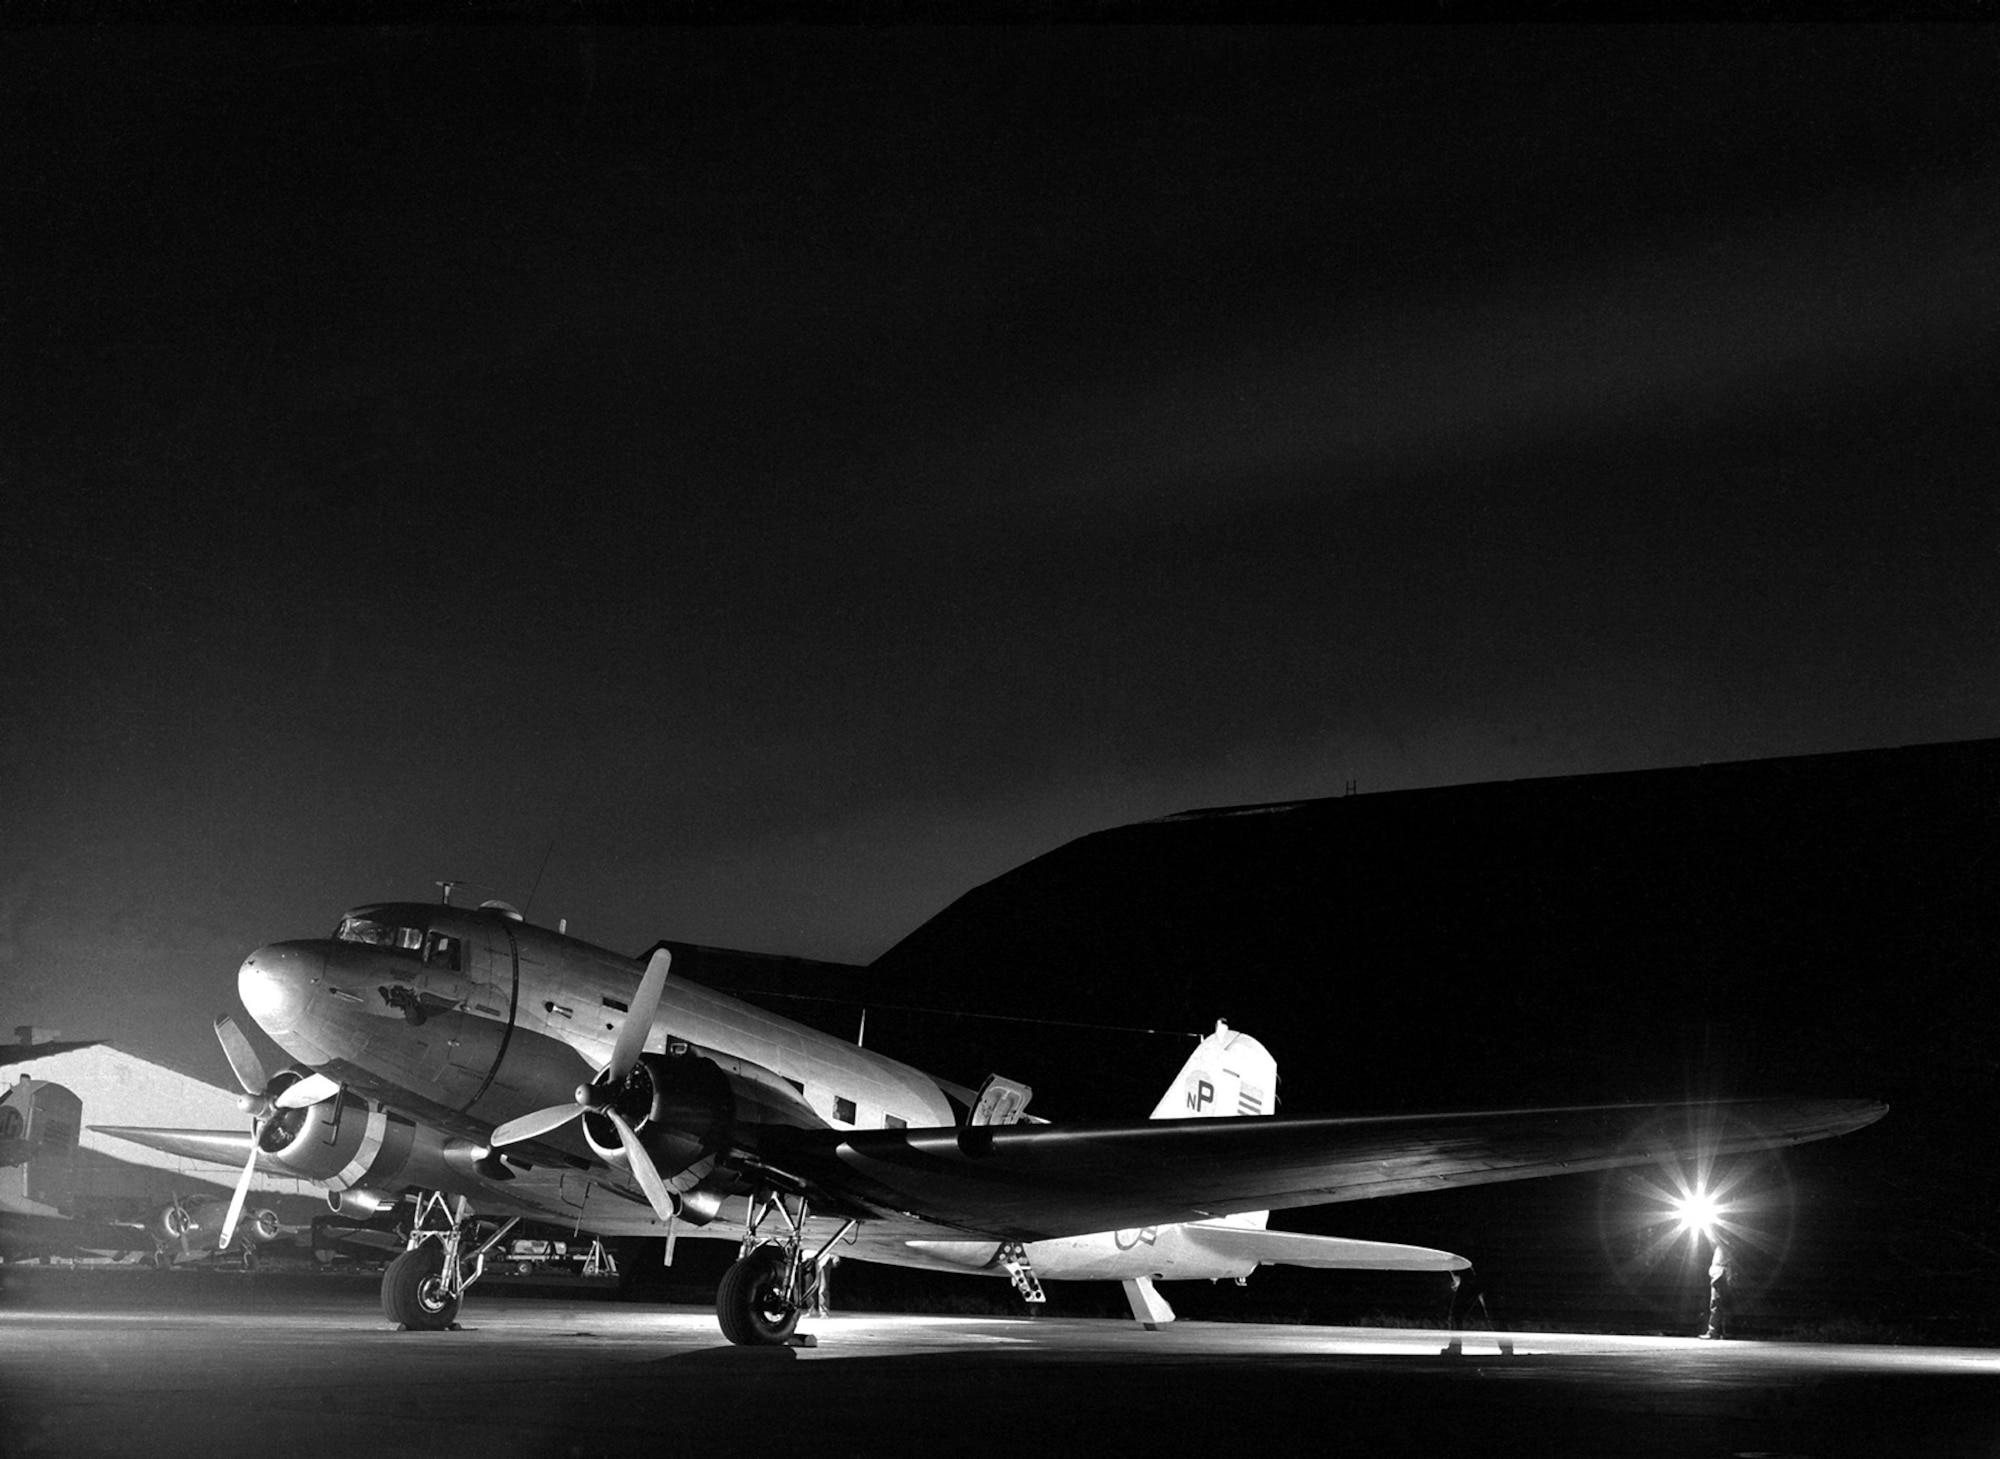 A South Vietnamese Air Force (VNAF) C-47 Skytrain of the 33rd Tactical Wing at Tan Son Nhut Air Base before a night flare drop mission in January 1967. Members of the 33rd worked with U.S. Air Force advisors to provide flare illumination for allied ground security forces and Air Force close air support operations. (U.S. Air Force photo)